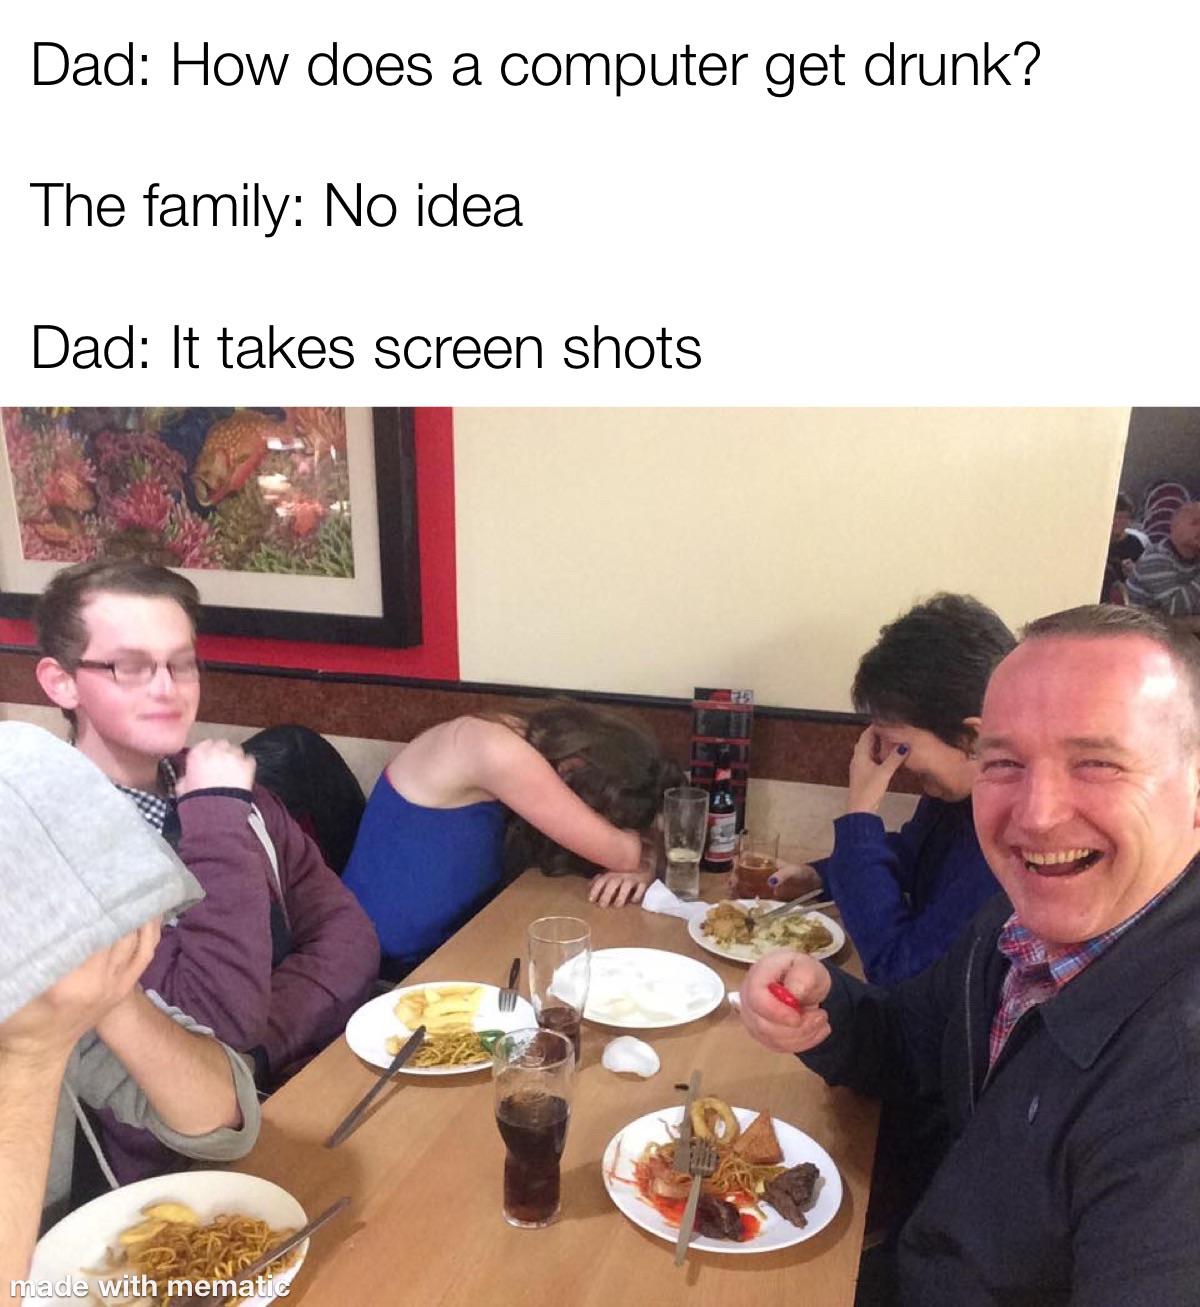 dad joke meme - Dad How does a computer get drunk? The family No idea Dad It takes screen shots made with mematic